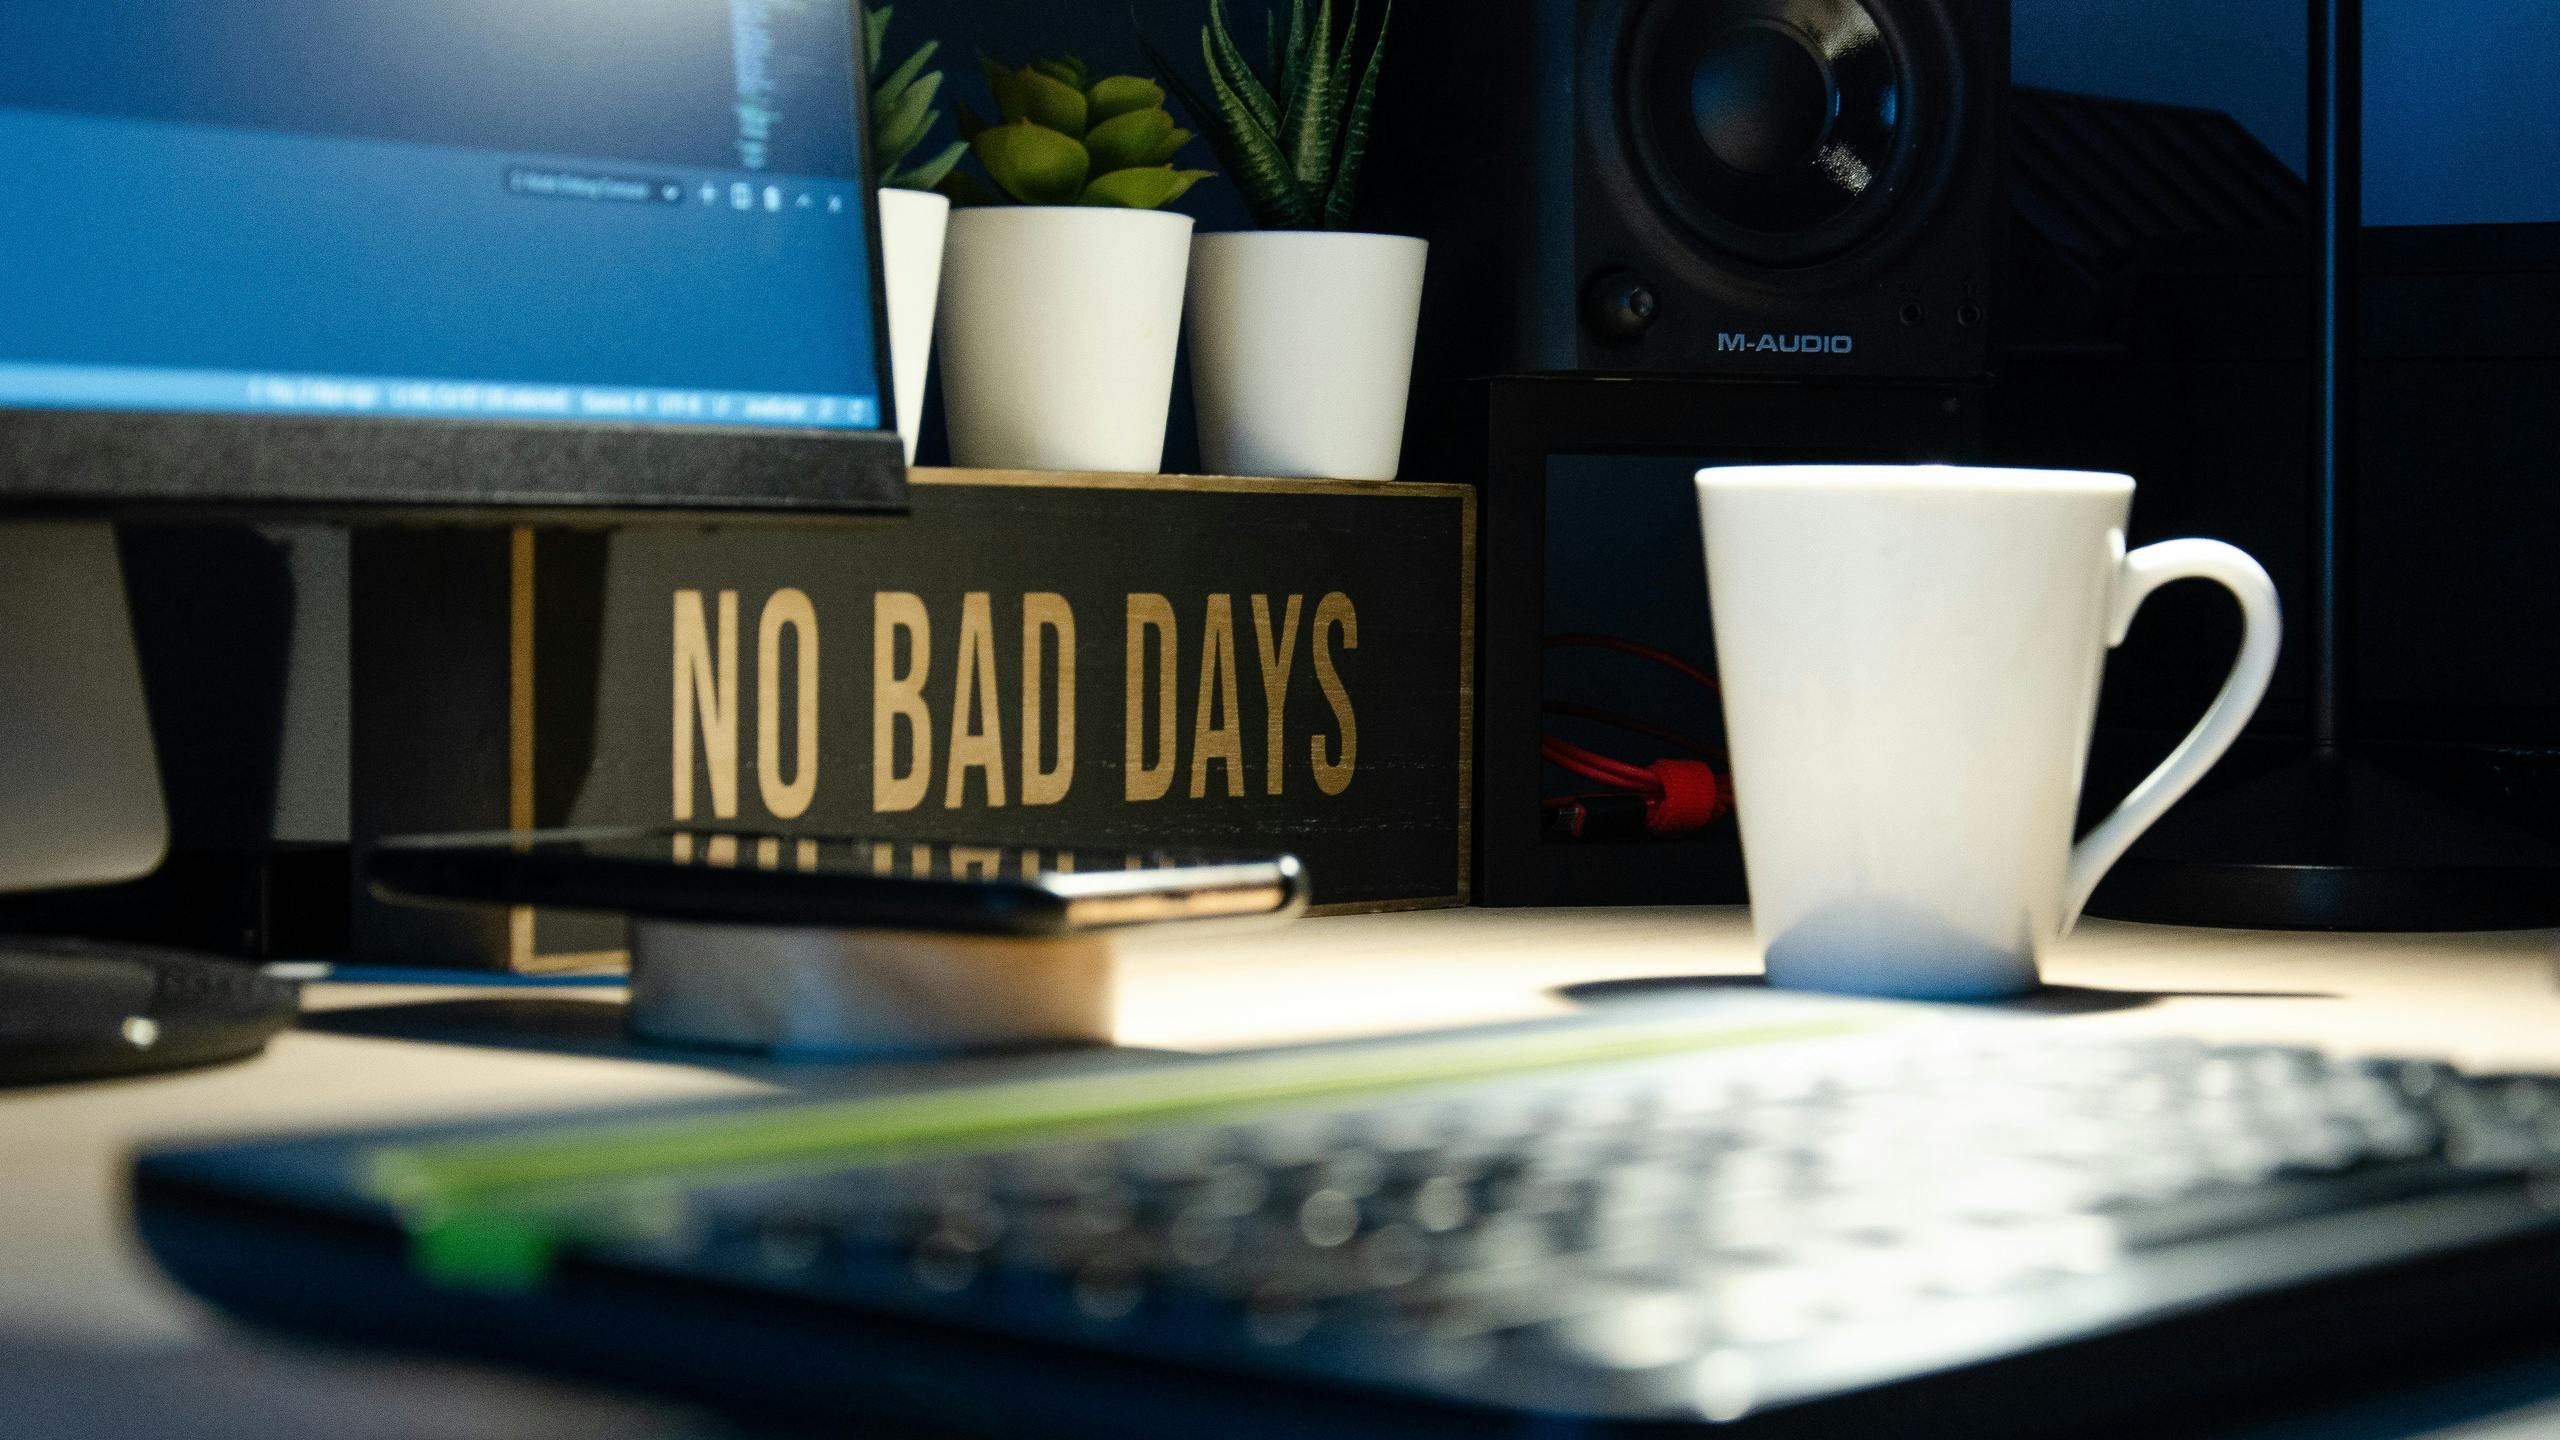 No Bad Days sign on desk next to coffee cup